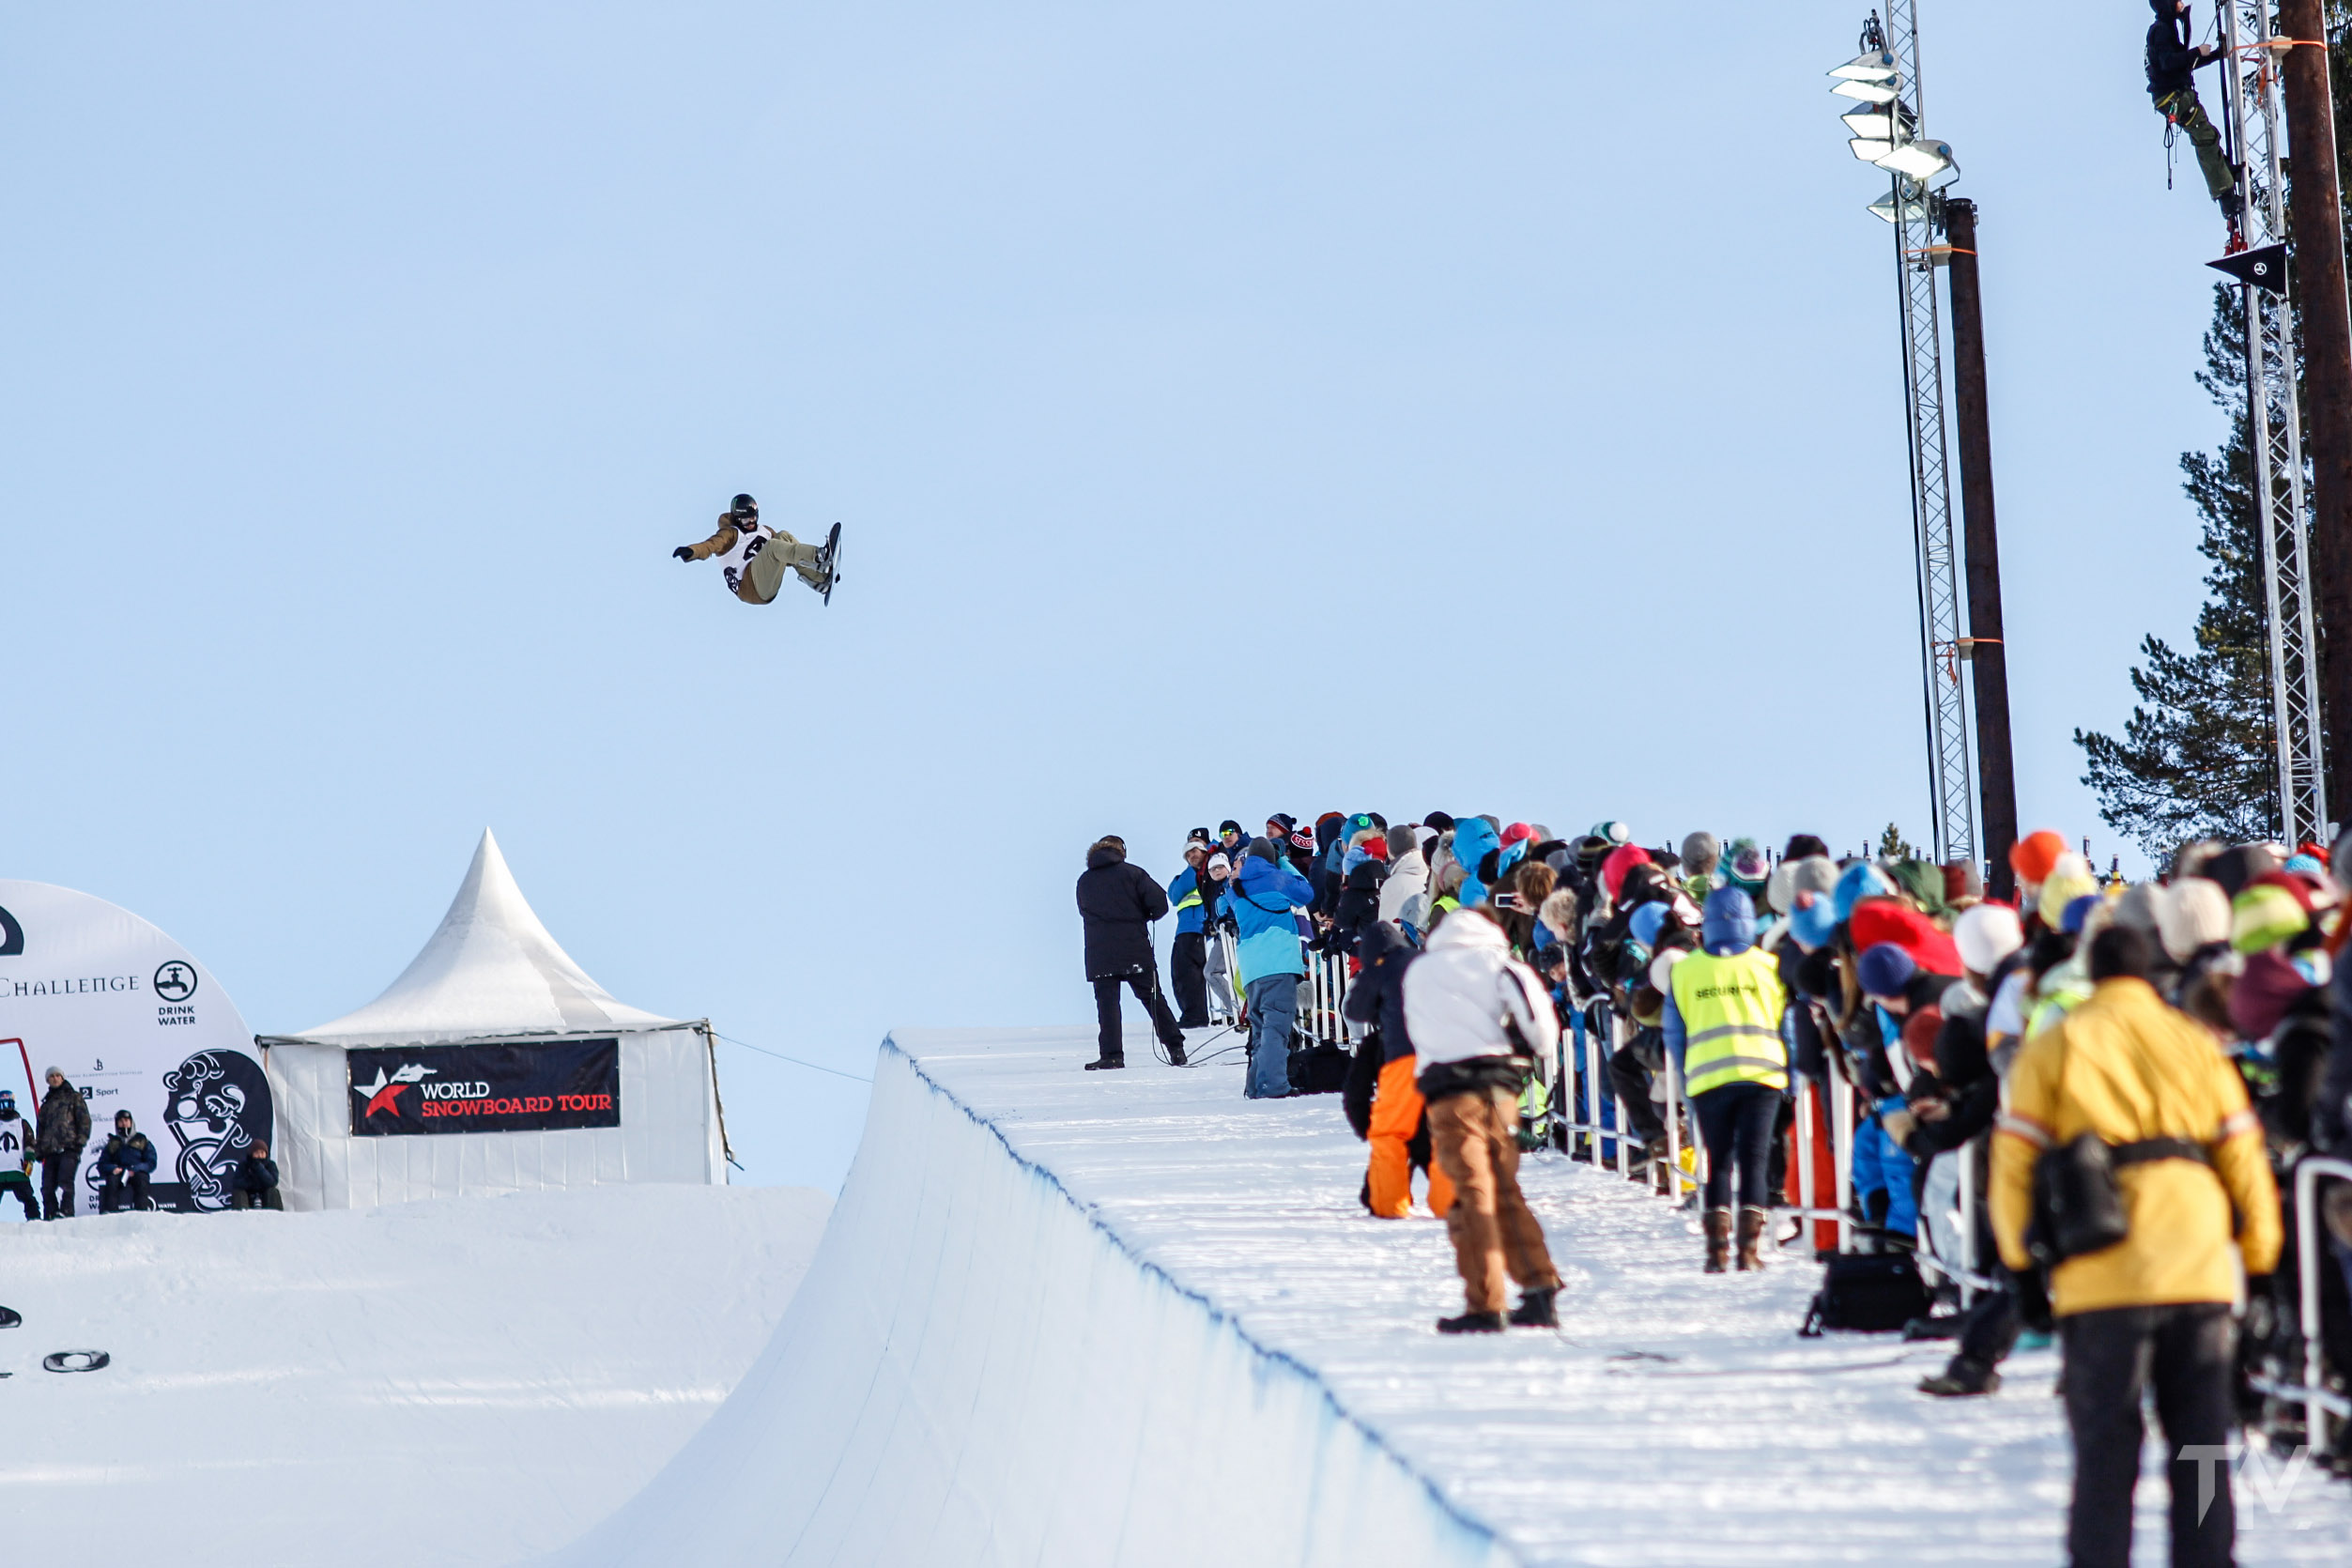 THE ARCTIC CHALLENGE AIMS TO BRING BACK FREESTYLE! World Snowboard Guide